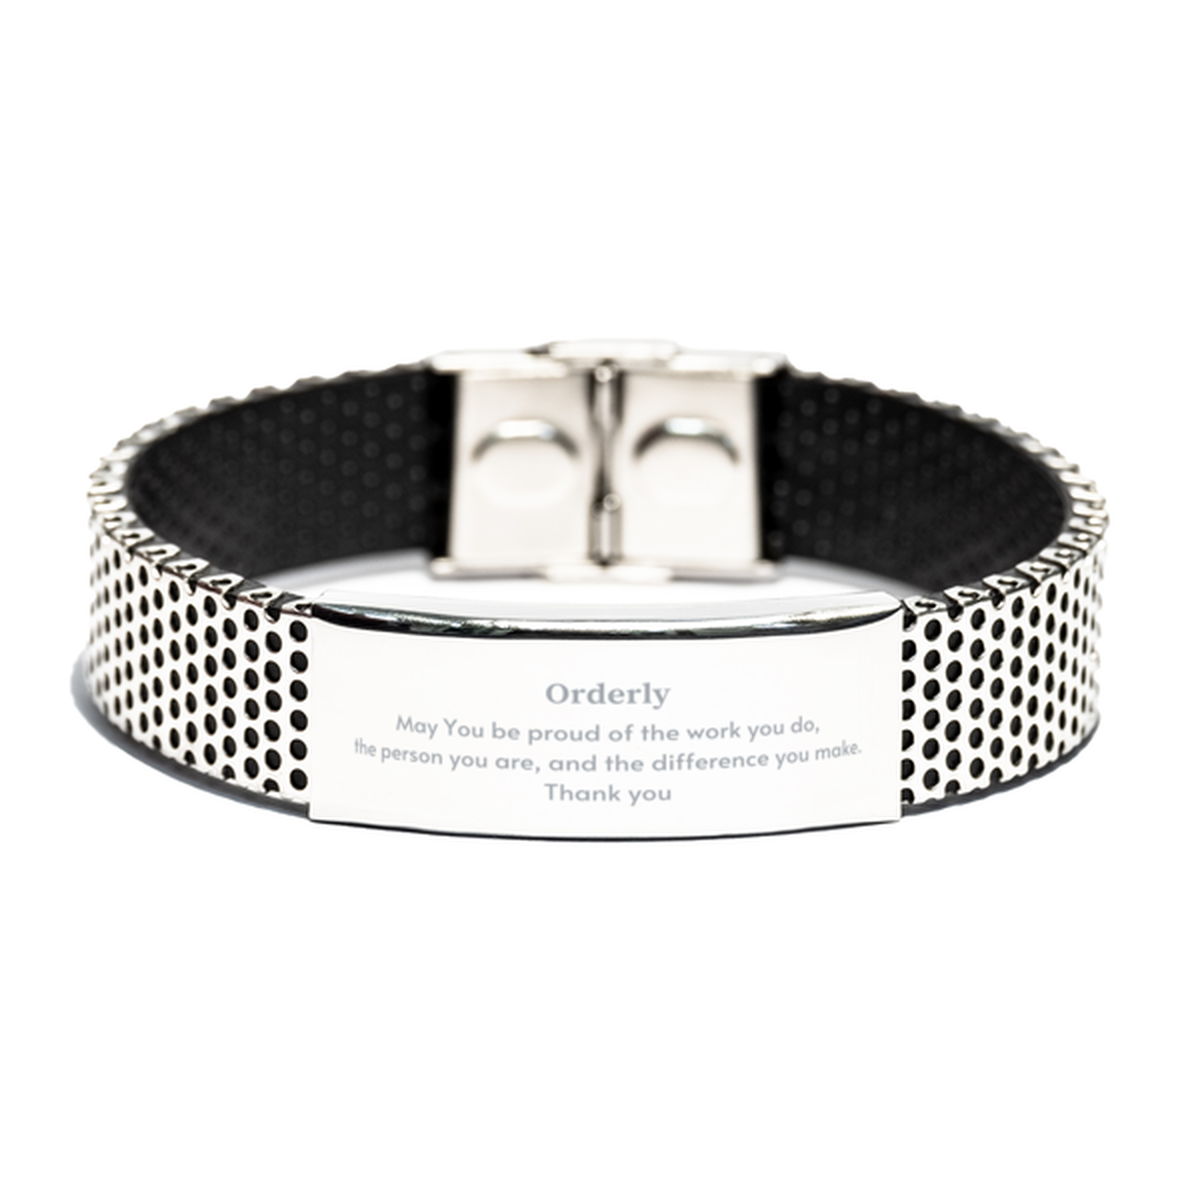 Heartwarming Stainless Steel Bracelet Retirement Coworkers Gifts for Orderly, Orderly May You be proud of the work you do, the person you are Gifts for Boss Men Women Friends